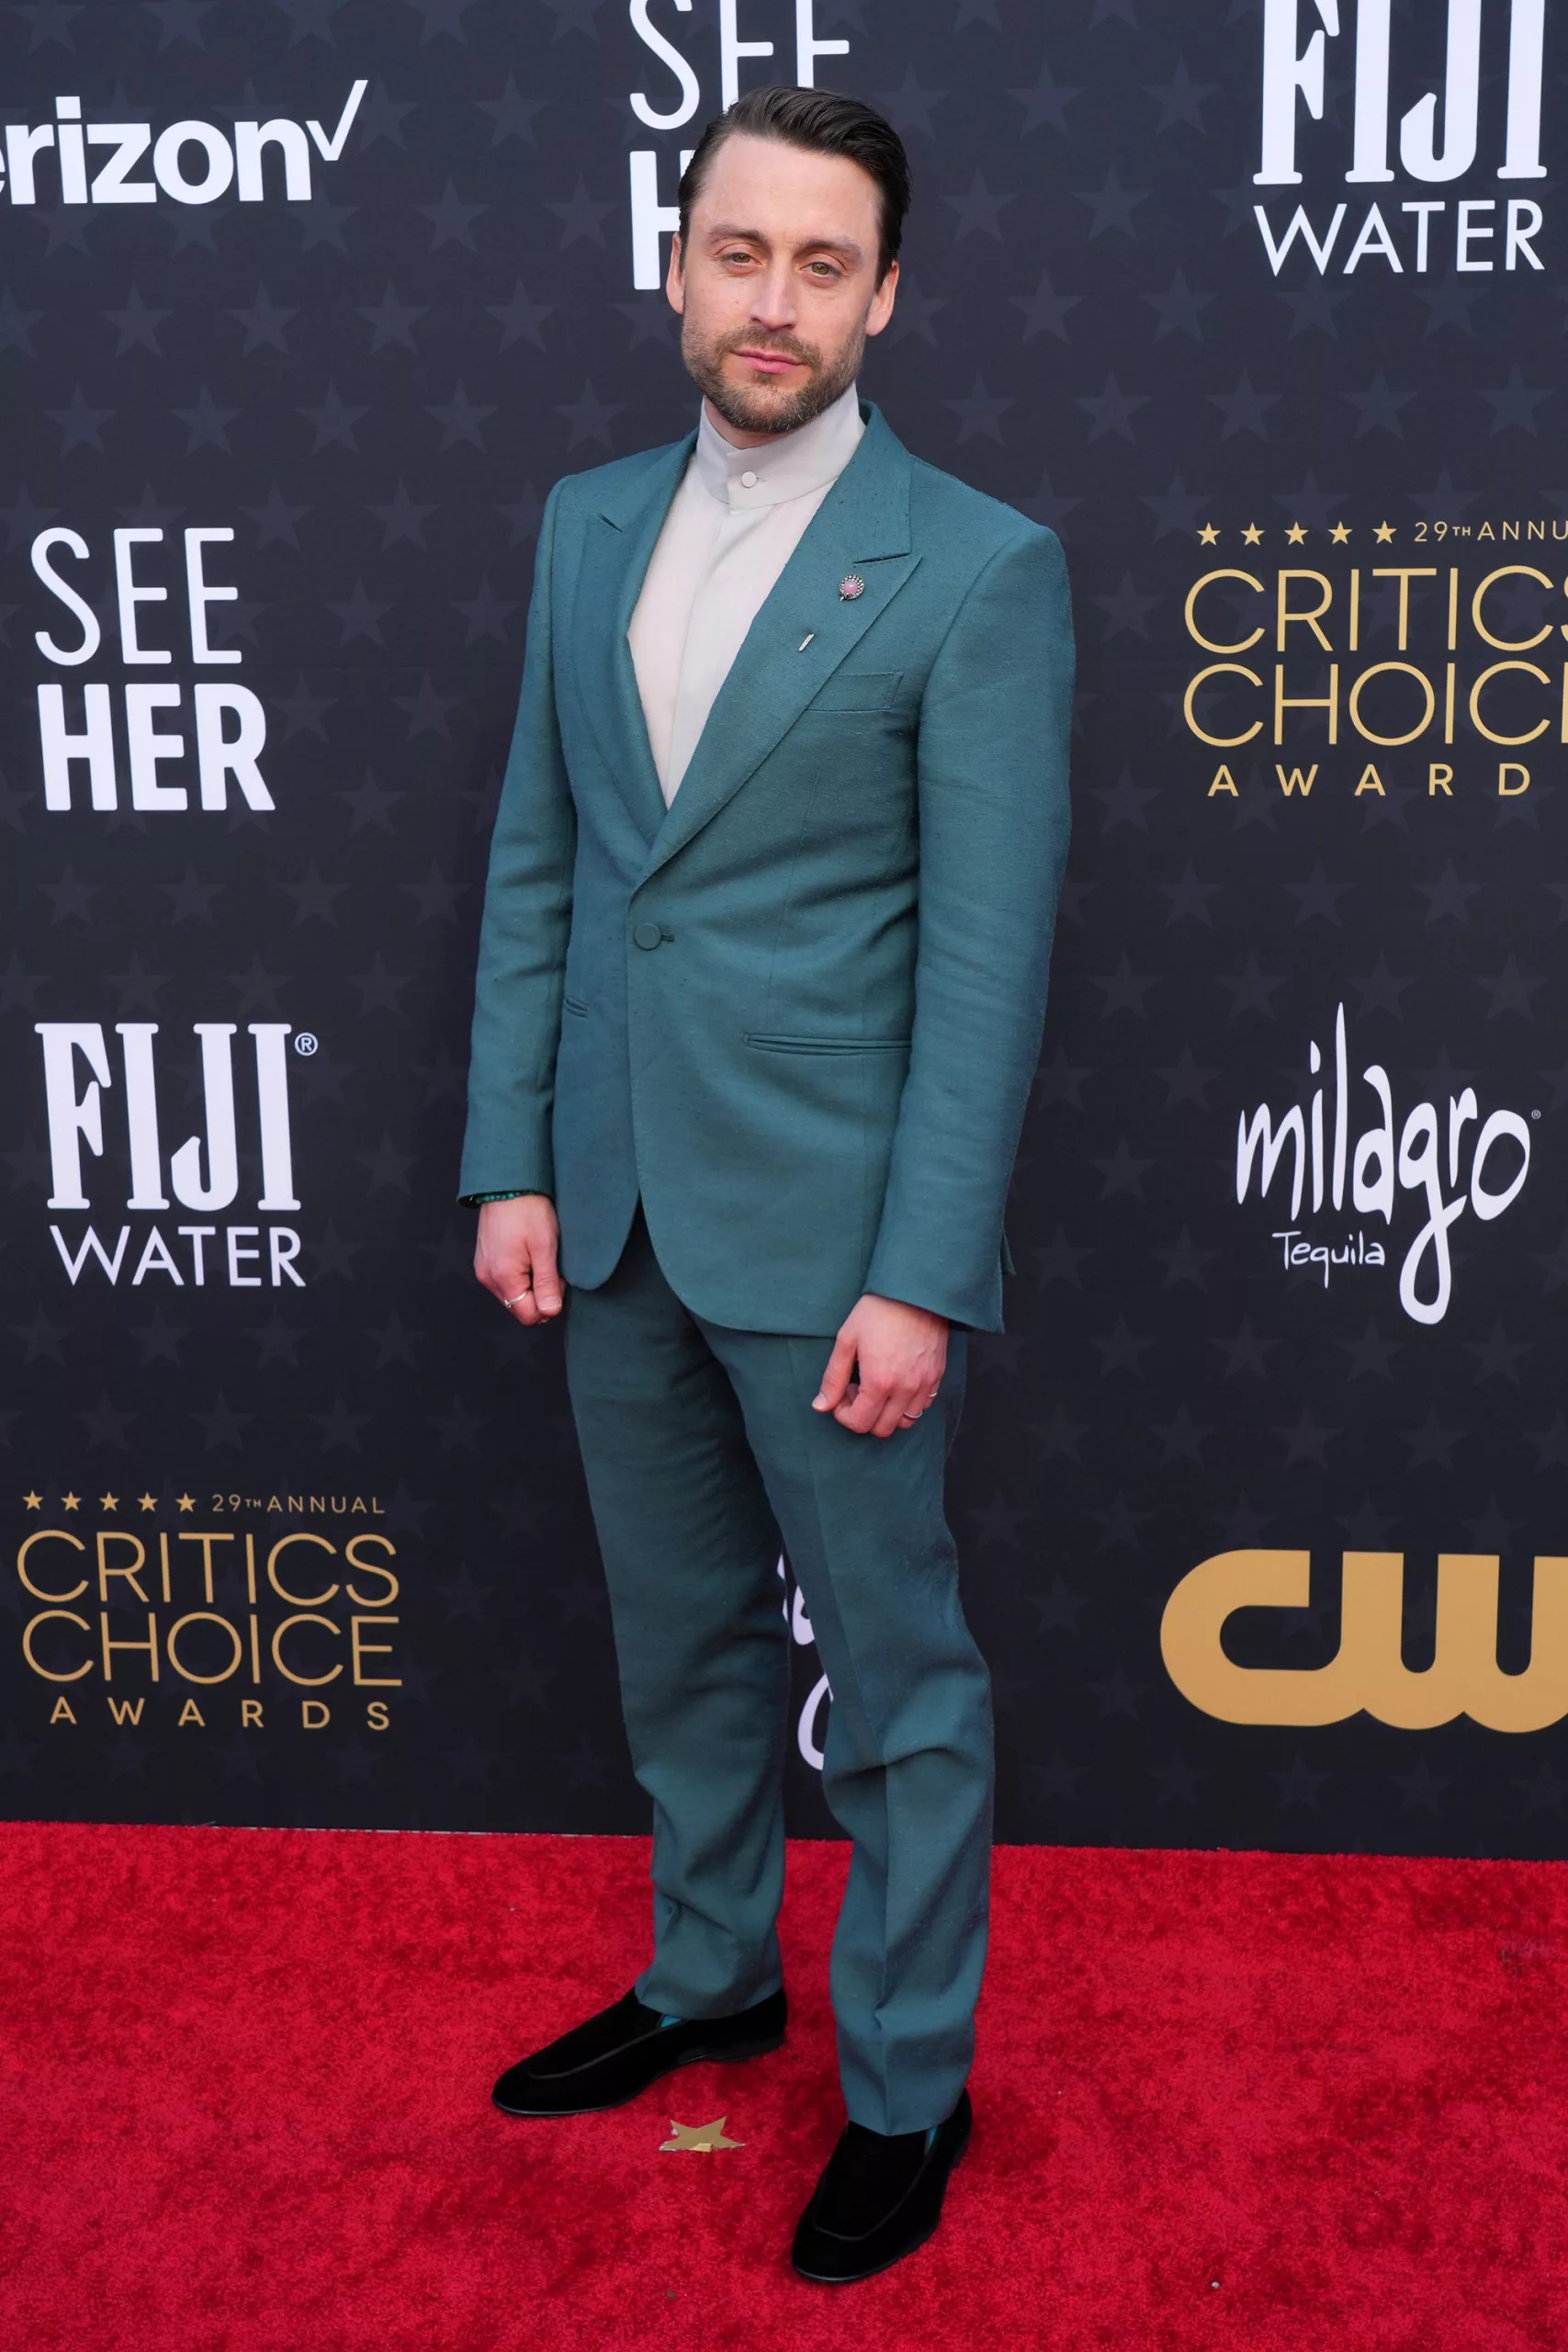 Kieran Culkin, who went on to win Best Actor in a Drama Series, sported a teal Zegna suit paired with beaded turquoise bracelets and an antique shell motif stick pin from jeweler Martin Katz.